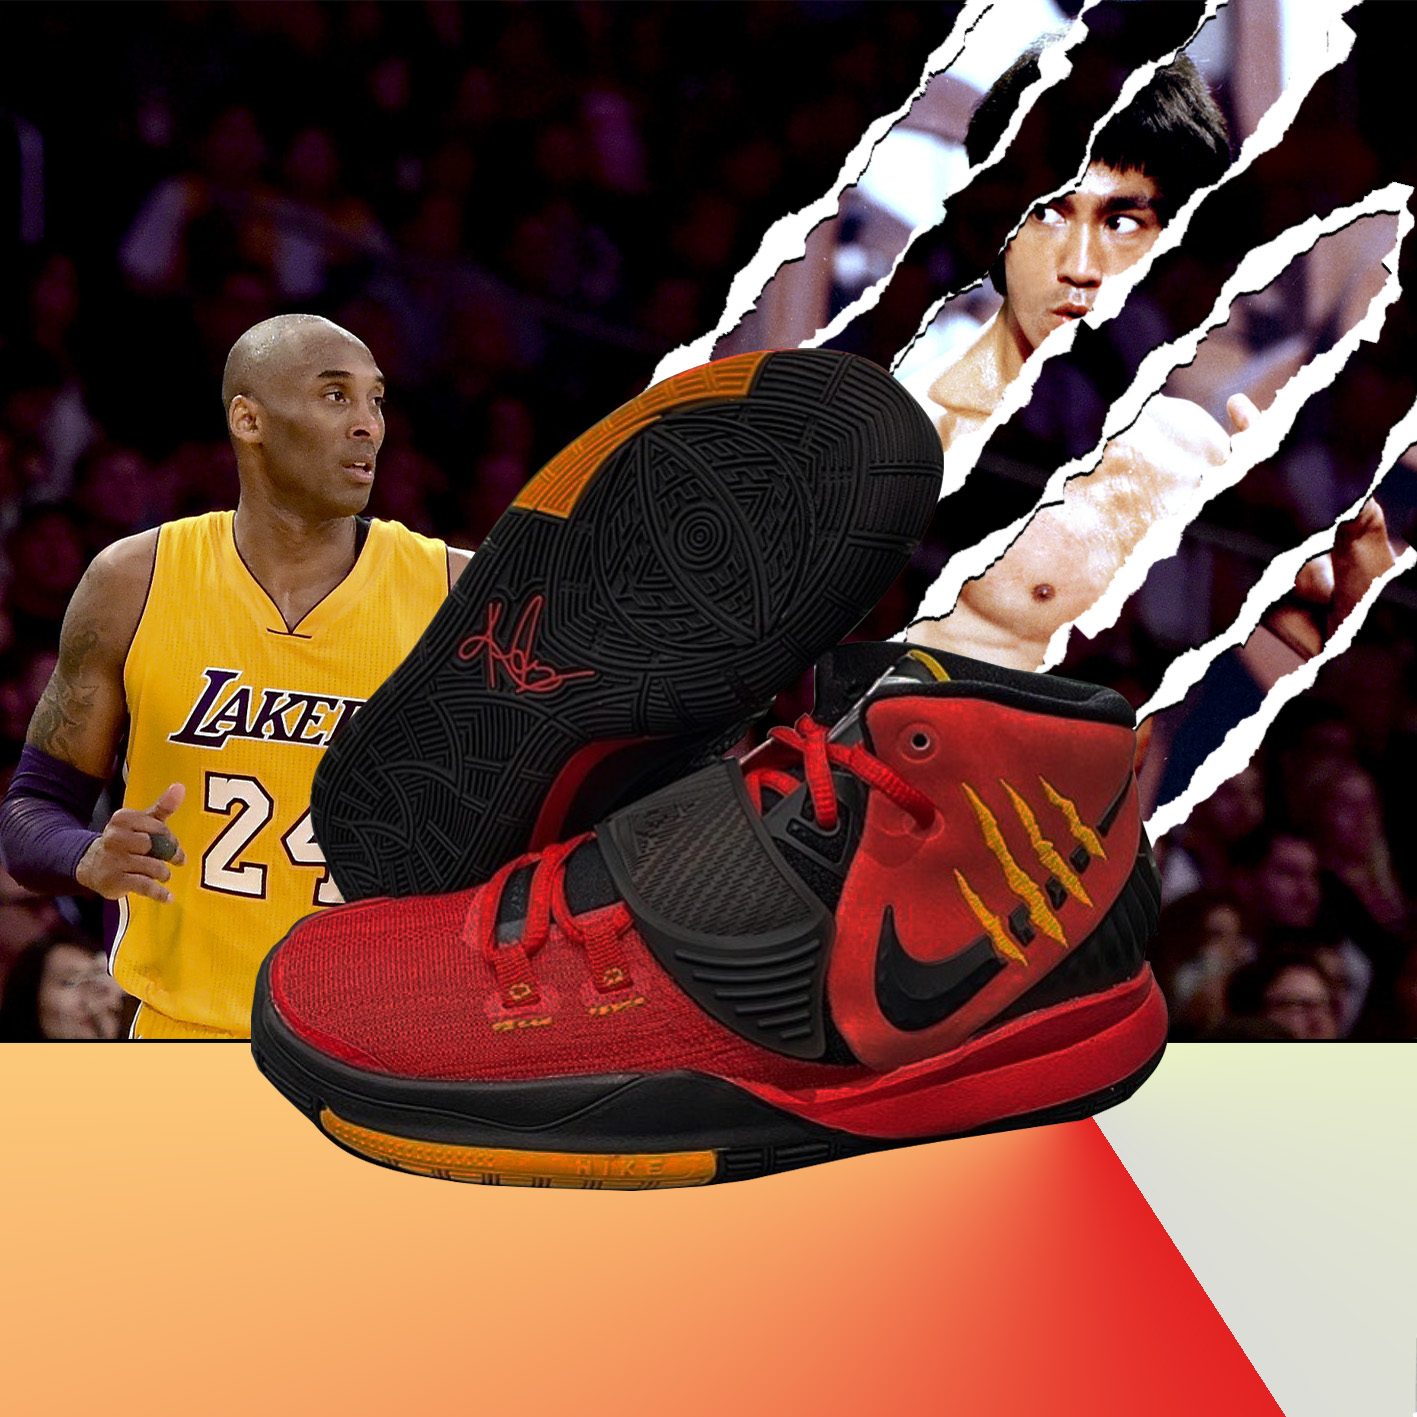 kyrie shoes bruce lee